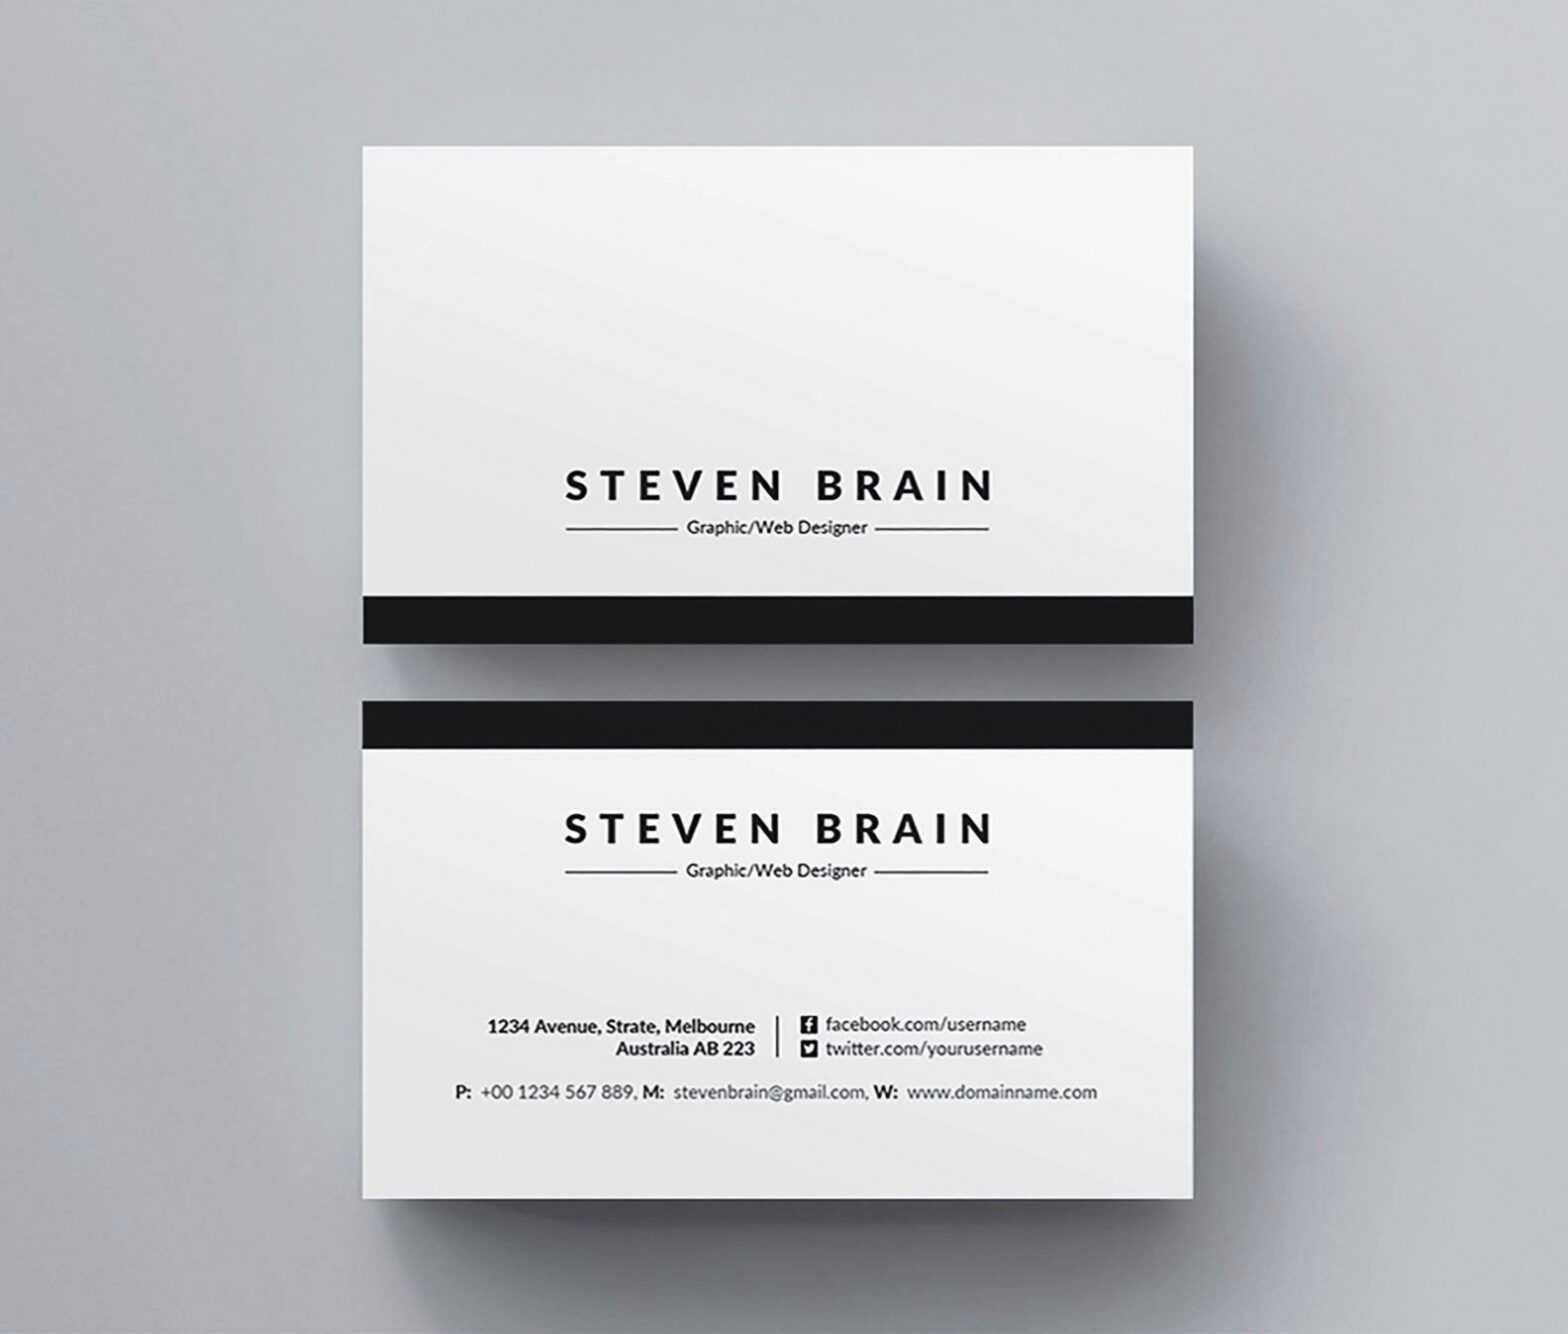 Word Business Card Template Free ~ Addictionary within Word 2013 Business Card Template